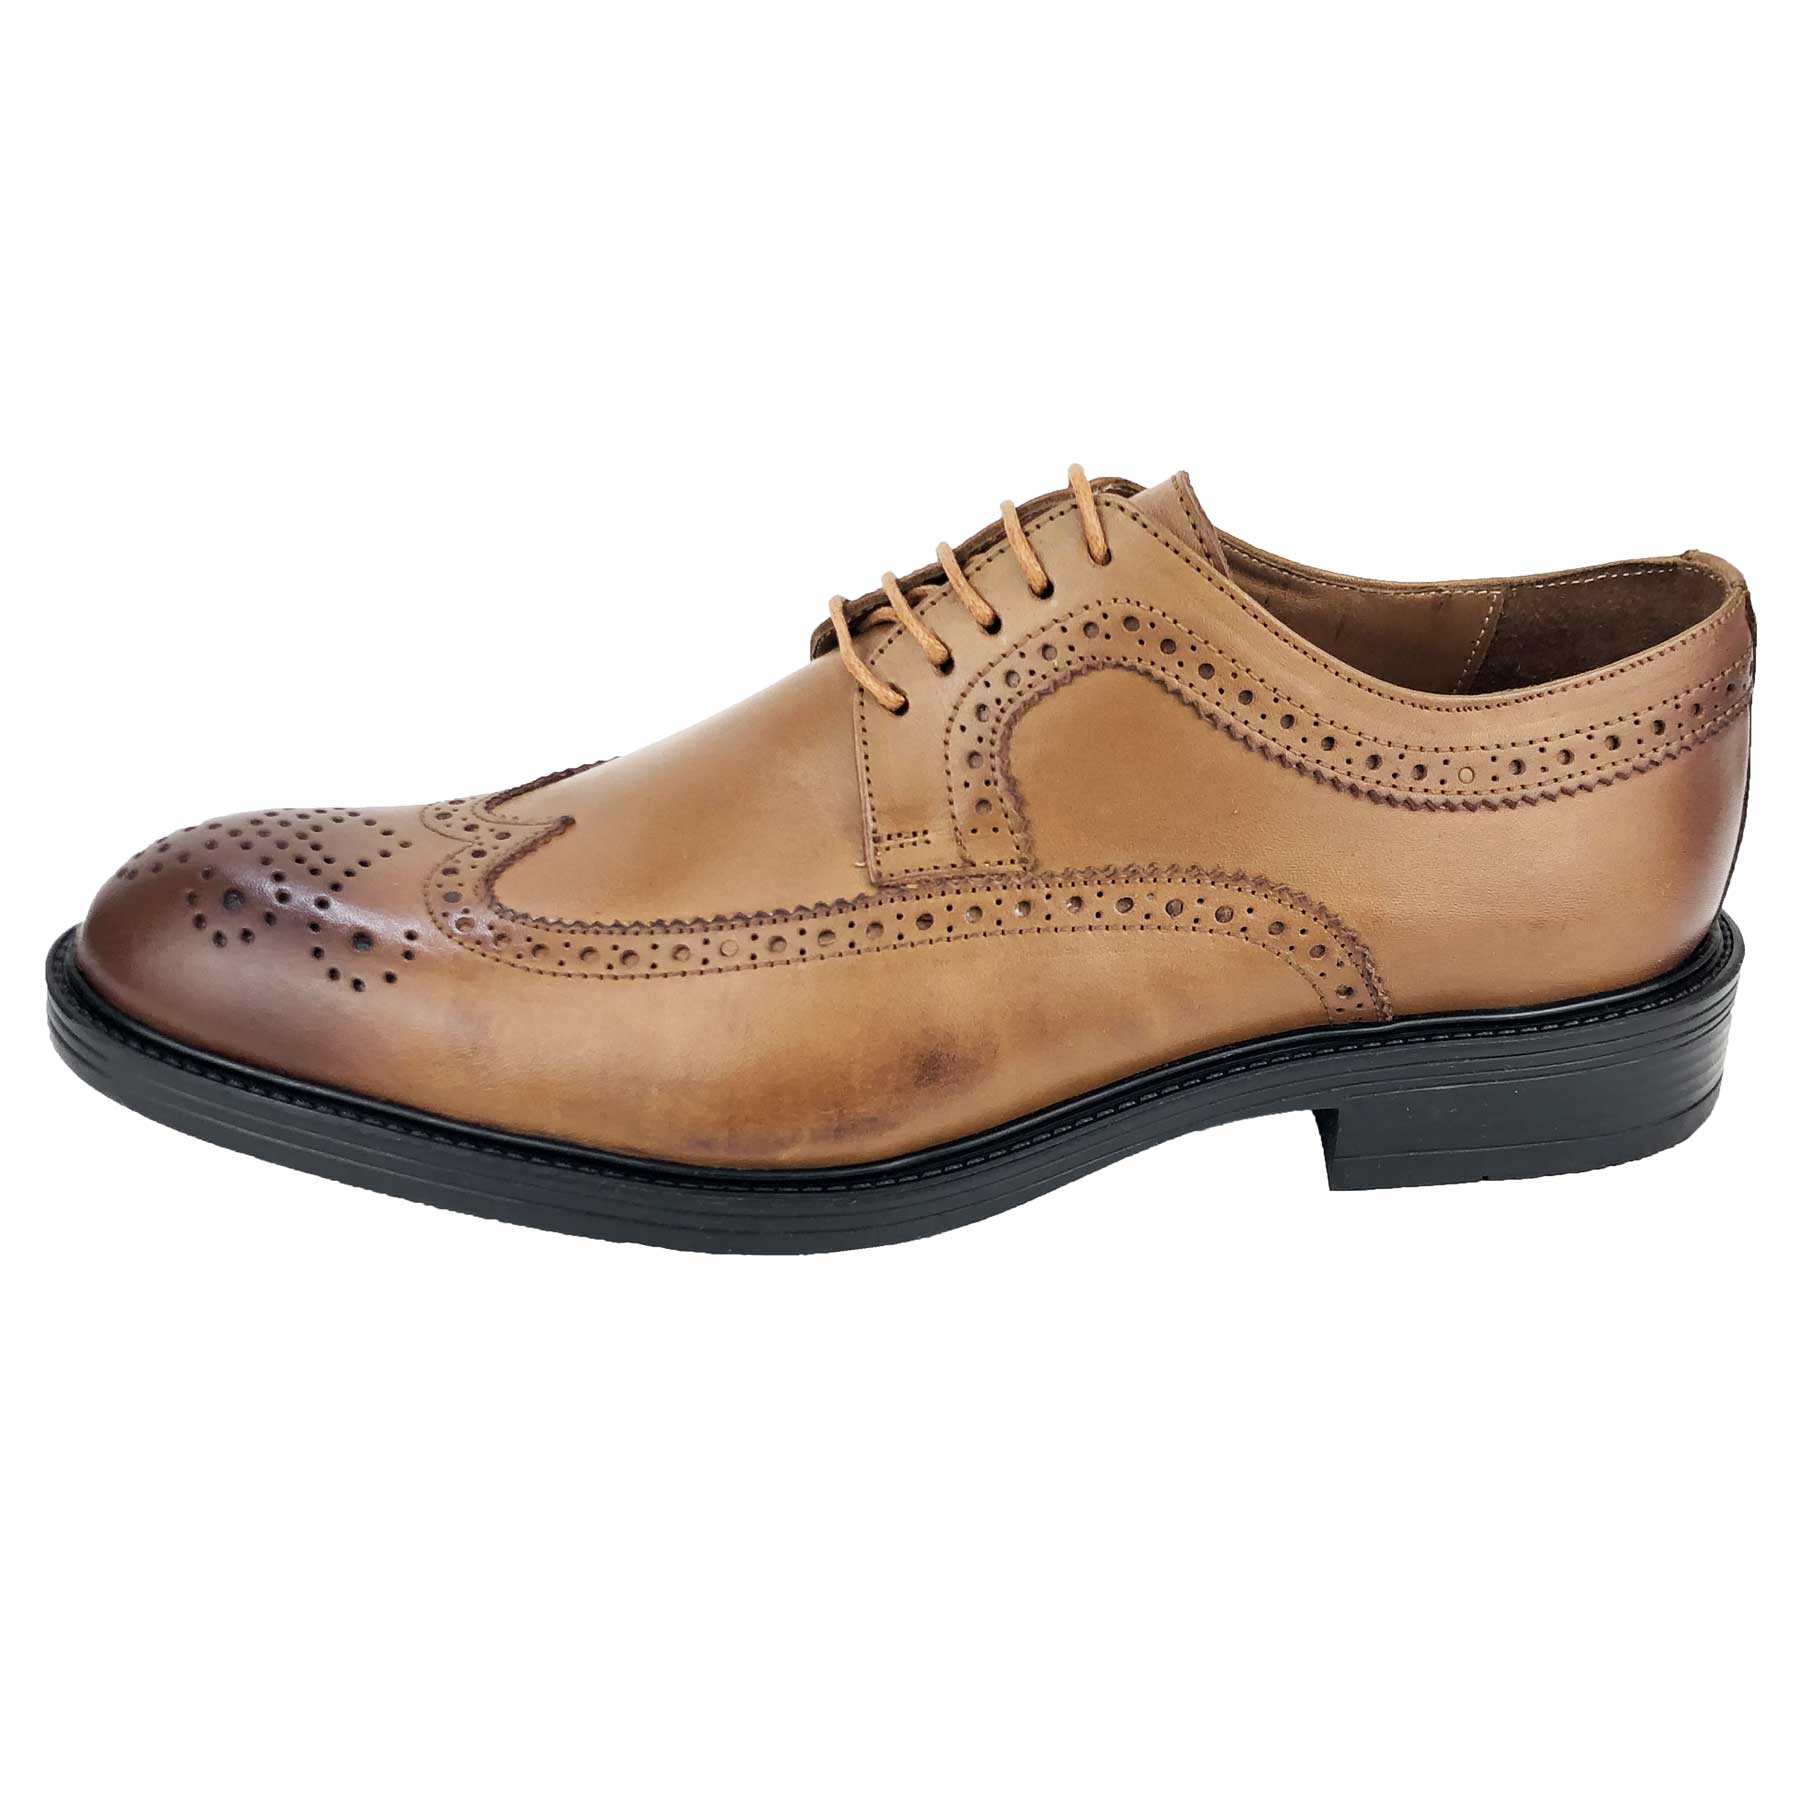 CH312-015 - Chaussure cuir sable - deluxe-maroc